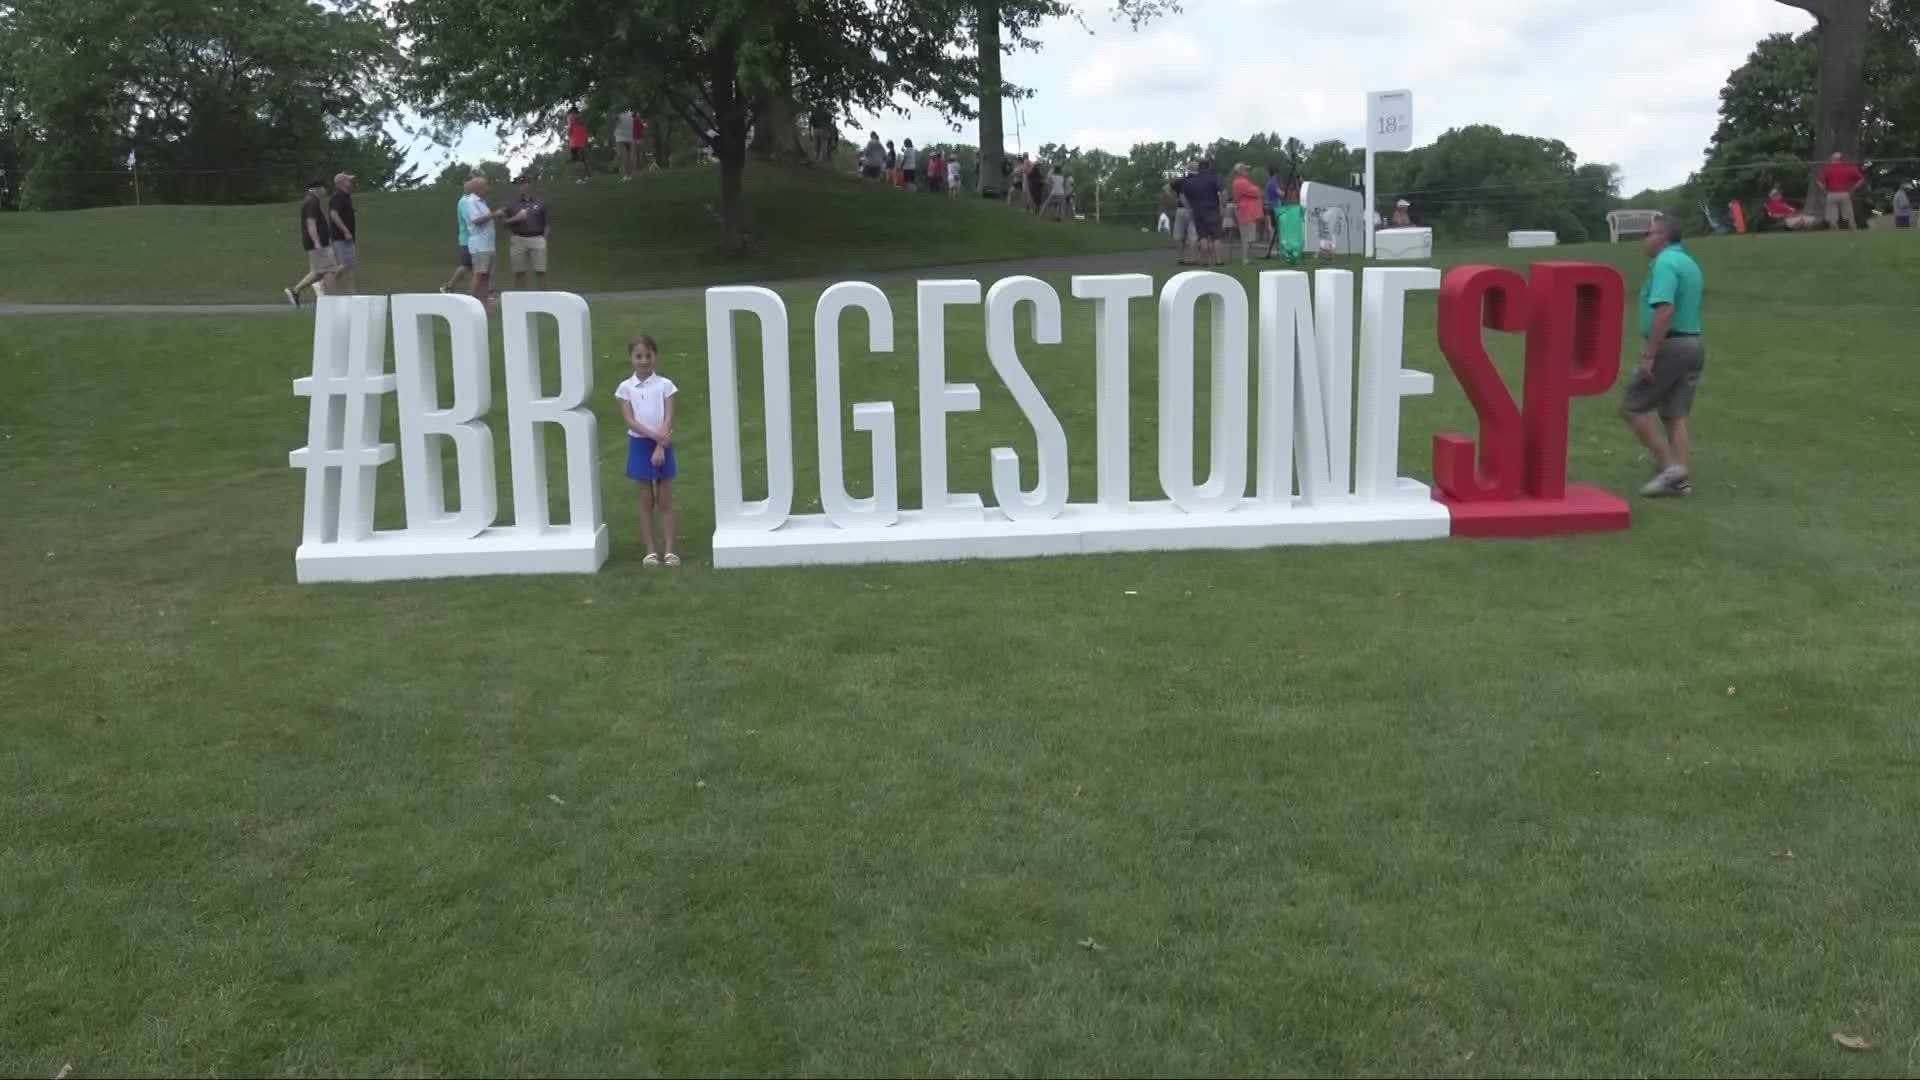 Big-time golf returns to Akron this weekend with the Bridgestone Senior Players Championship at Firestone Country Club.